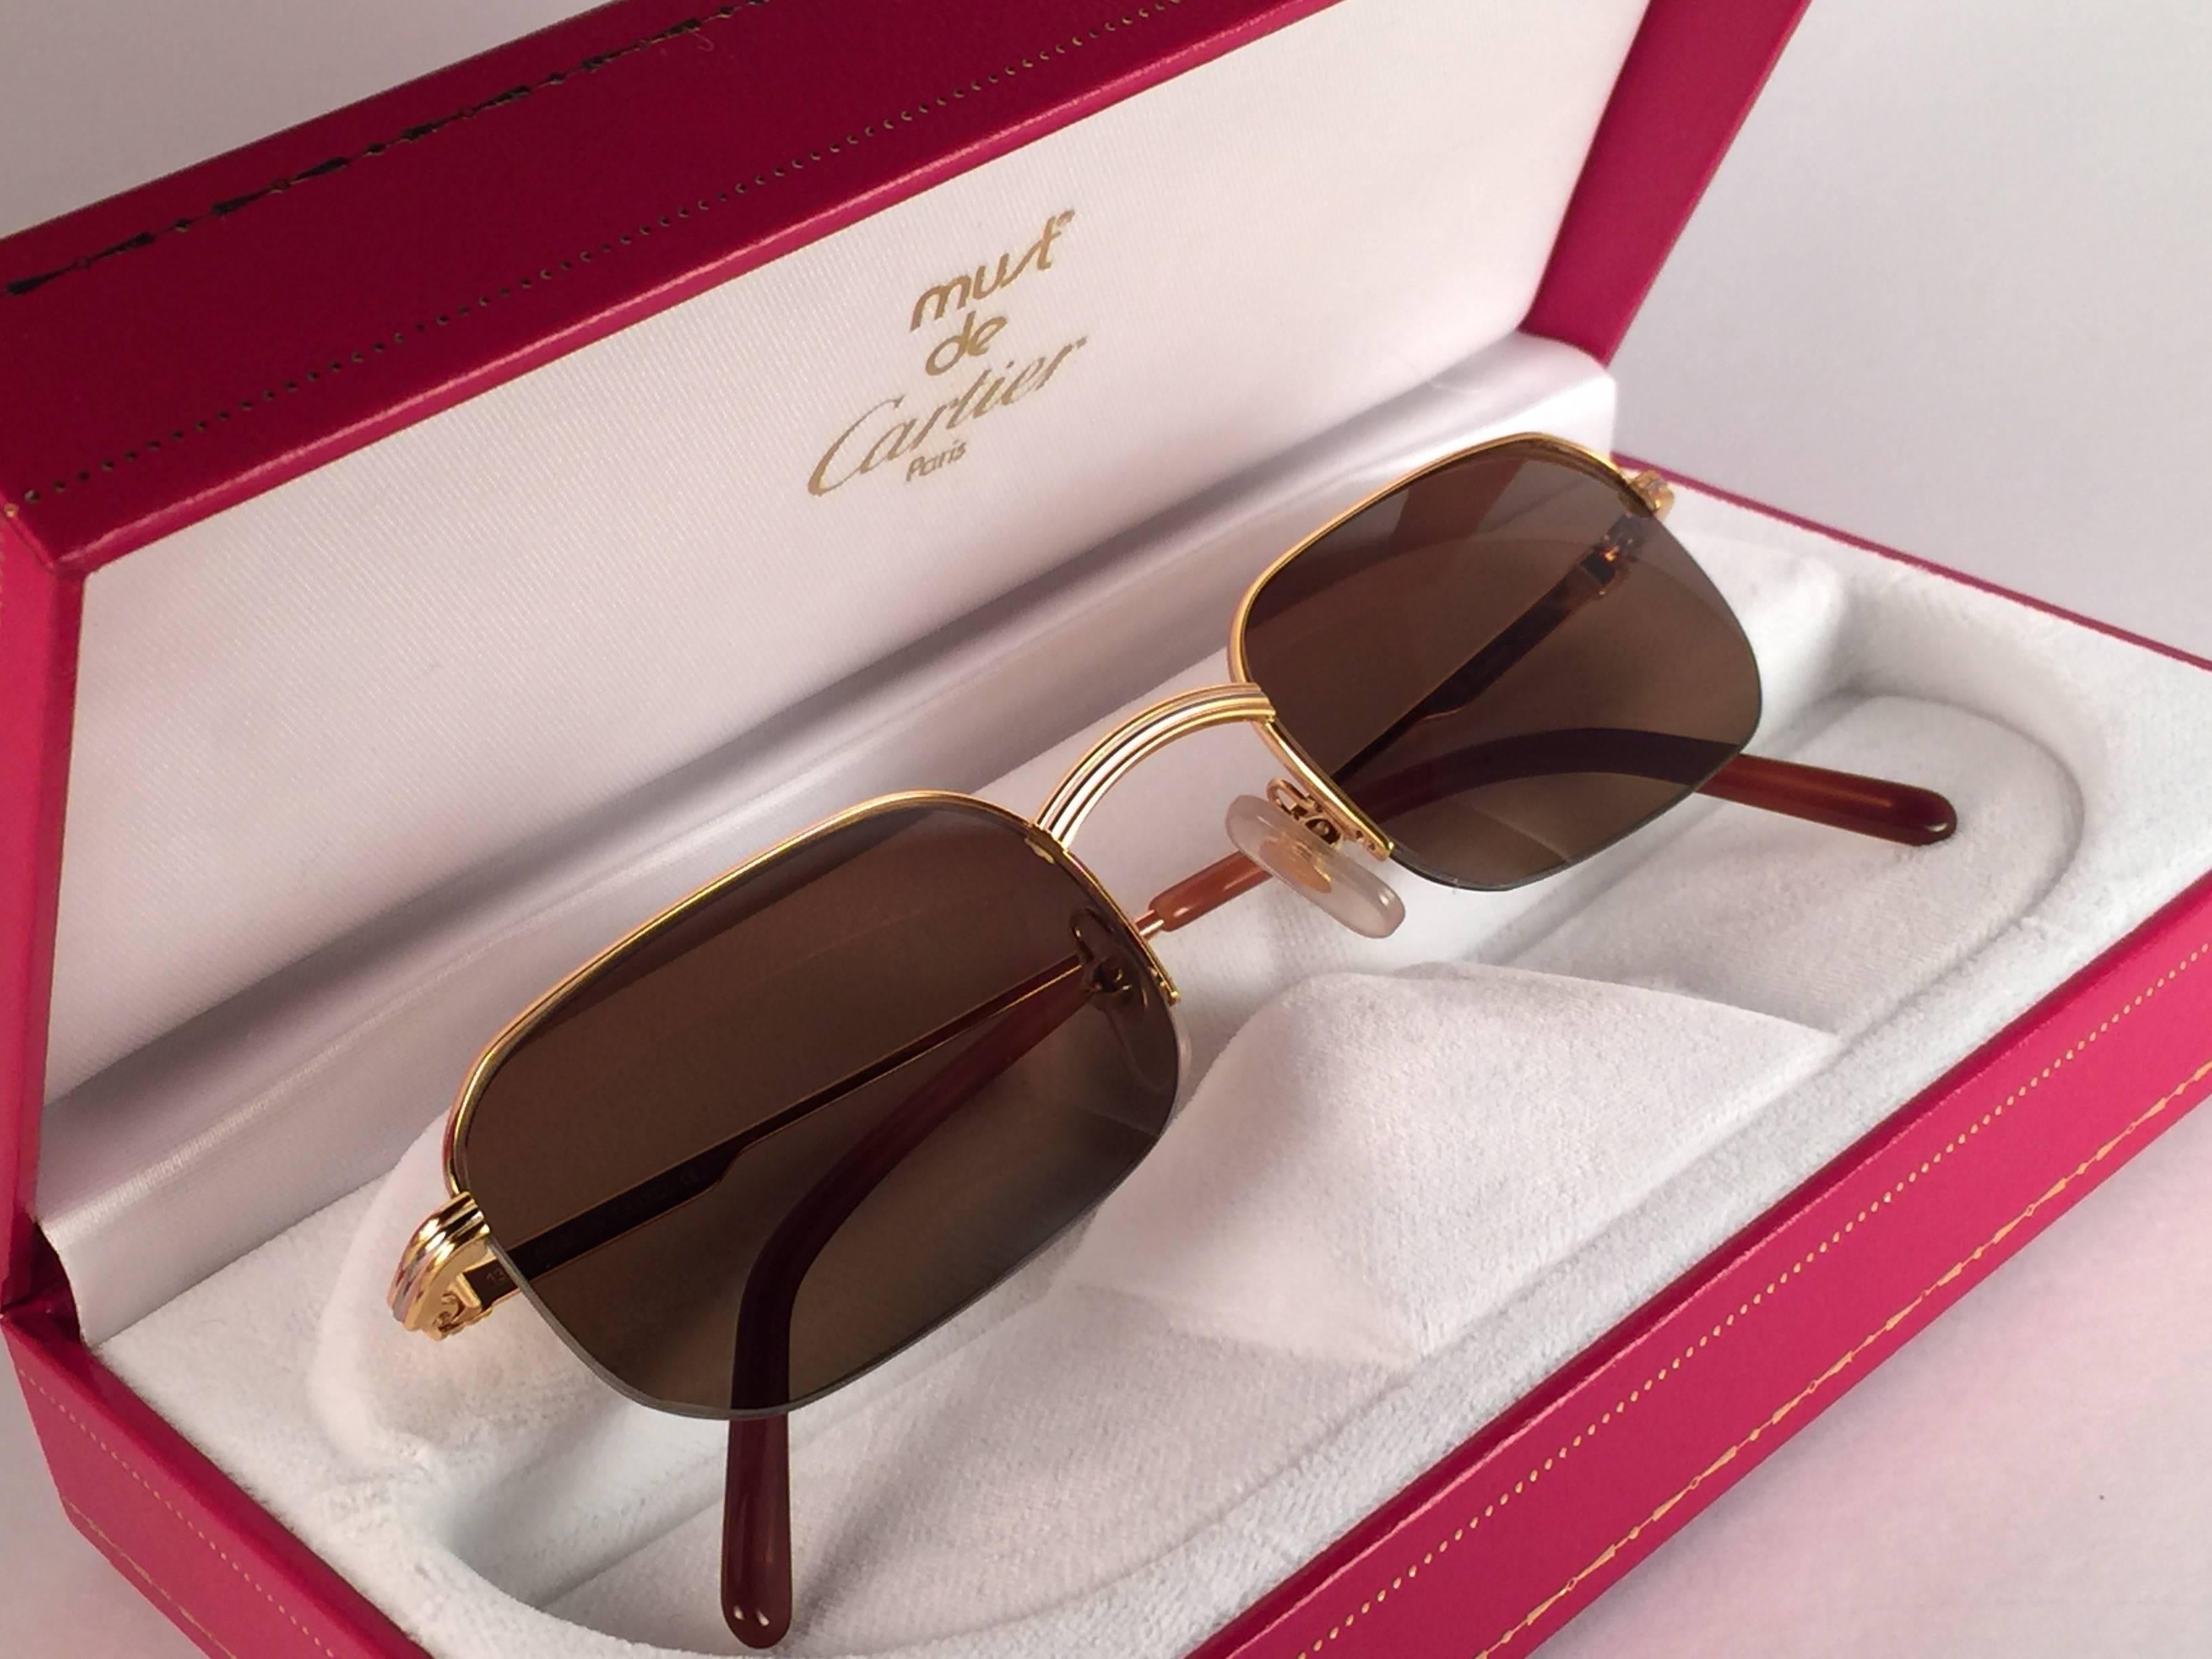 New 1990 Cartier Broadway half frame Vendome  49 [] 22 Sunglasses with brown (uv protection) lenses.  All hallmarks. Cartier gold signs on the ear paddles. These are like a pair of jewels on your nose. Beautiful design and a real sign of the times.